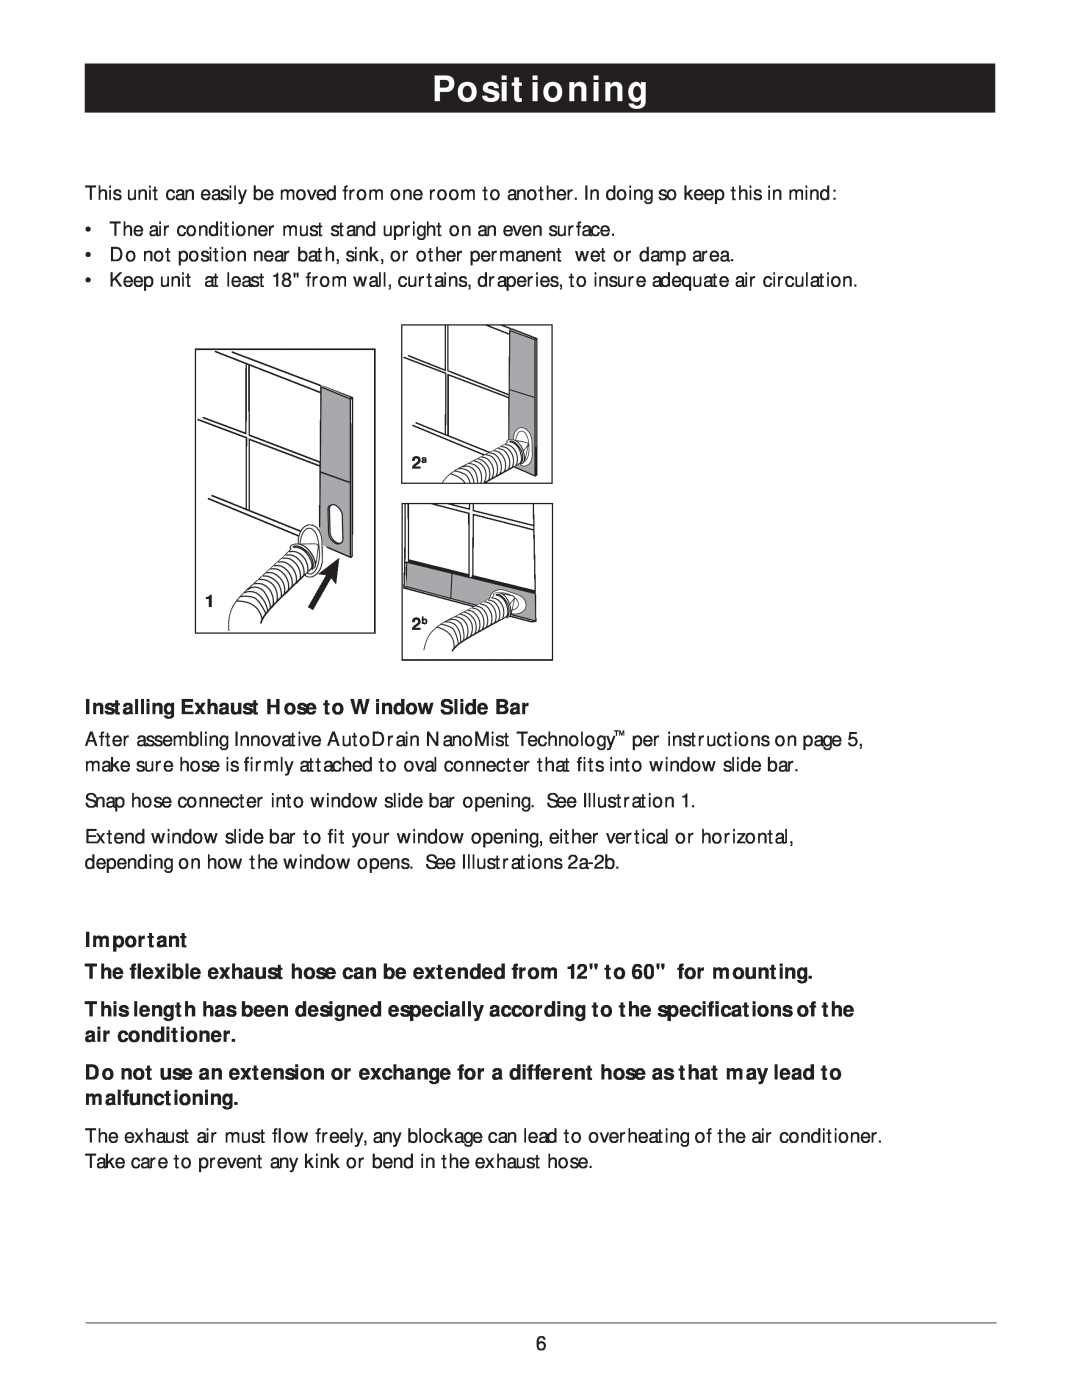 Amcor PORTABLE AIRCONDITIONER owner manual Positioning, Installing Exhaust Hose to Window Slide Bar 